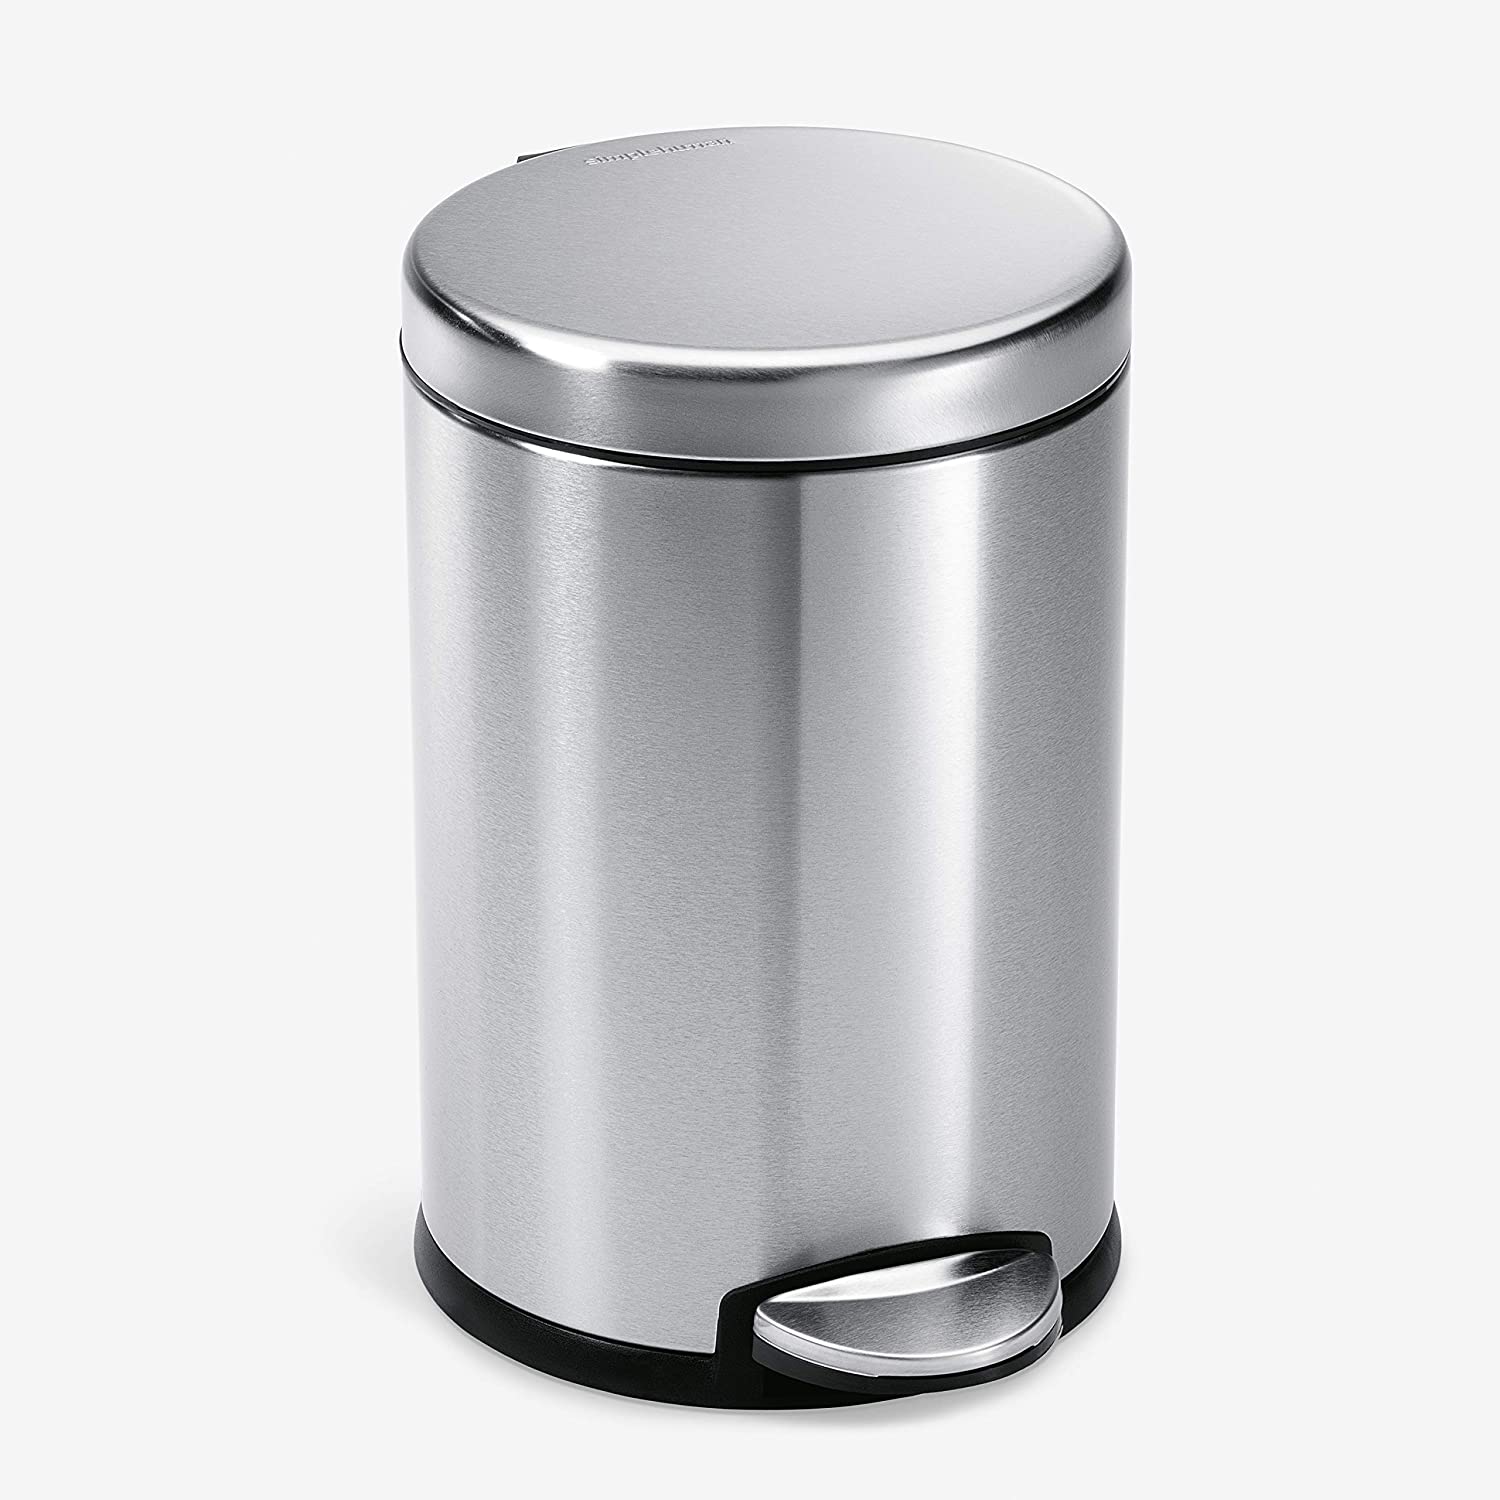 Simplehuman-Round-Pedal-Bin-Brushed-Stainless-Steel-4.5L